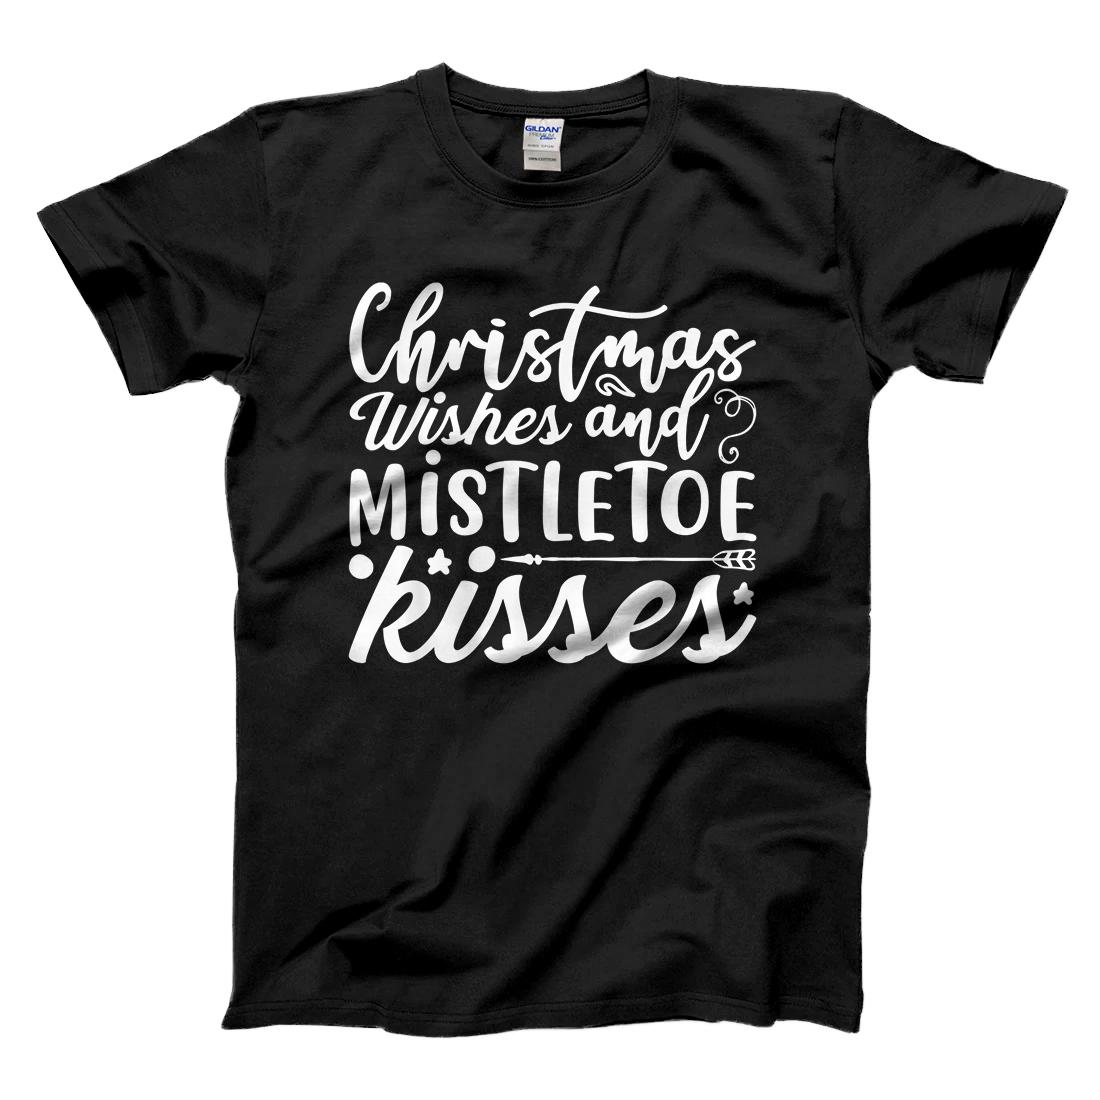 Personalized Christmas Gift - Christmas Wishes And Mistletoe Kisses T-Shirt